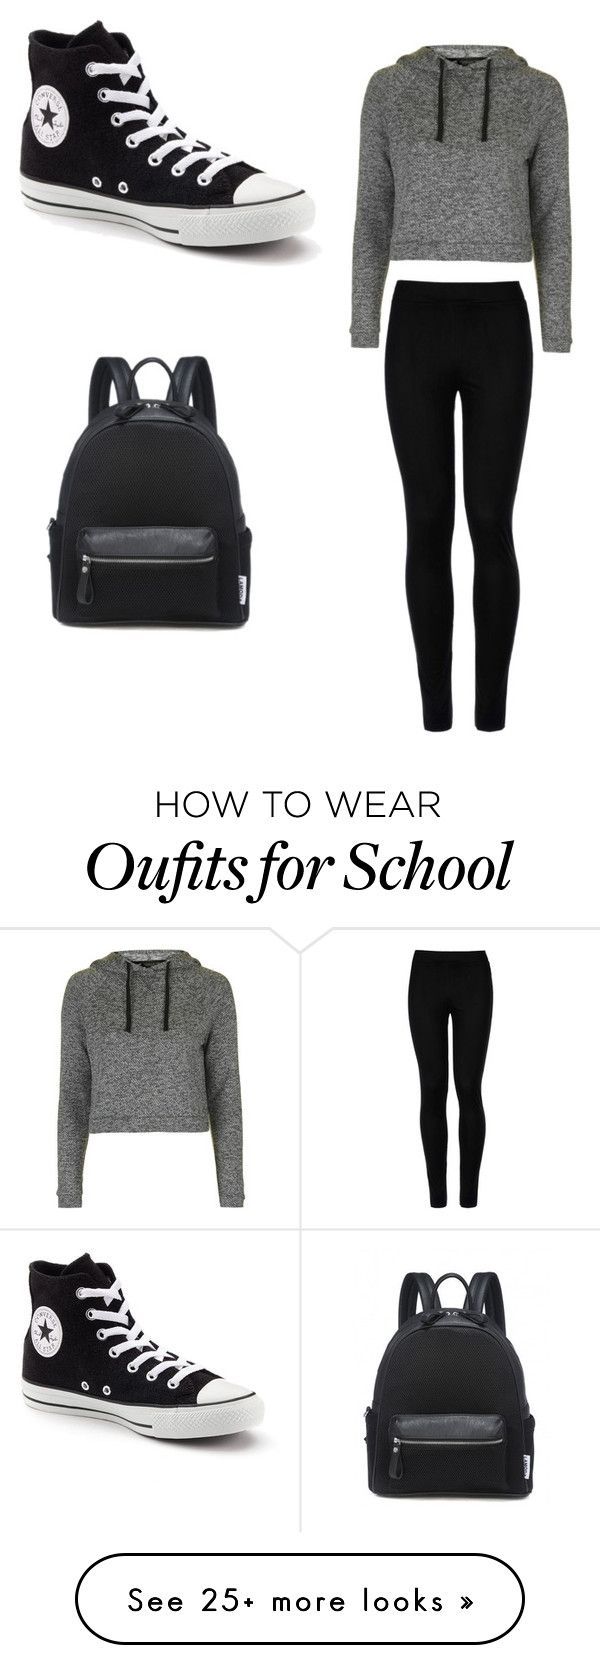 “Me school days” by kaomong-khaab on Polyvore featuring Wolford, Topshop and Converse